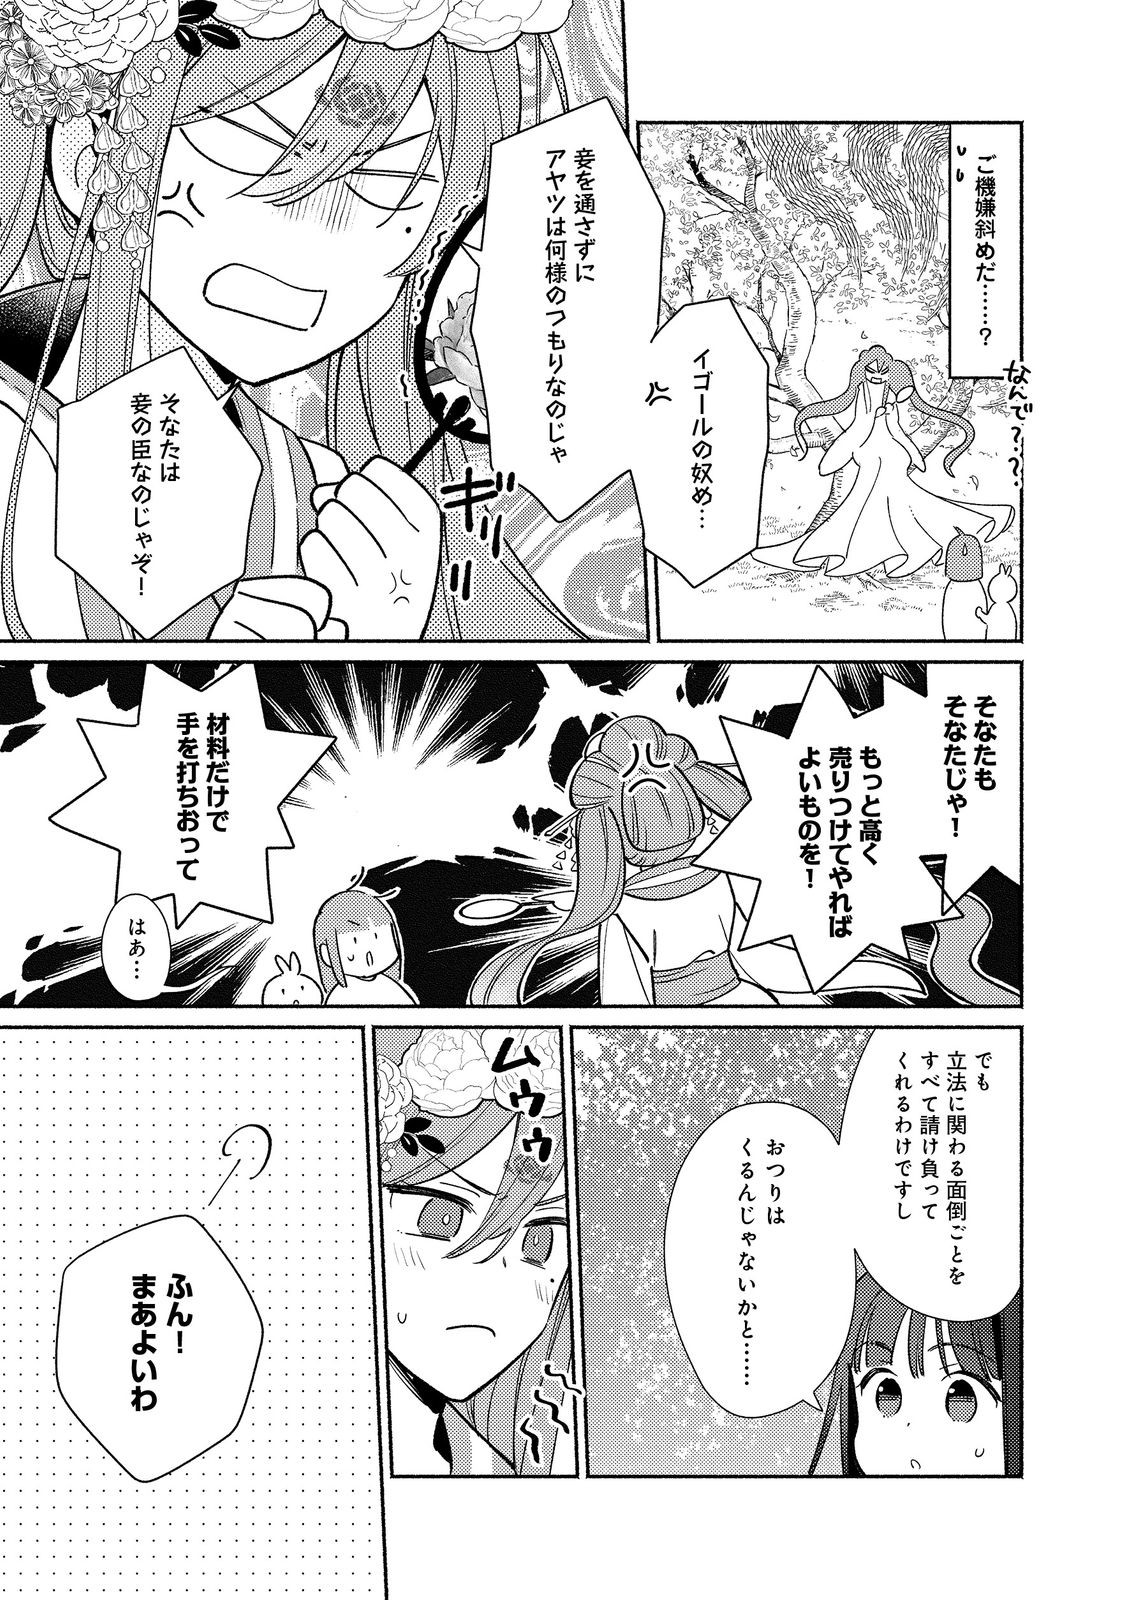 I’m the White Pig Nobleman 第20.2話 - Page 10